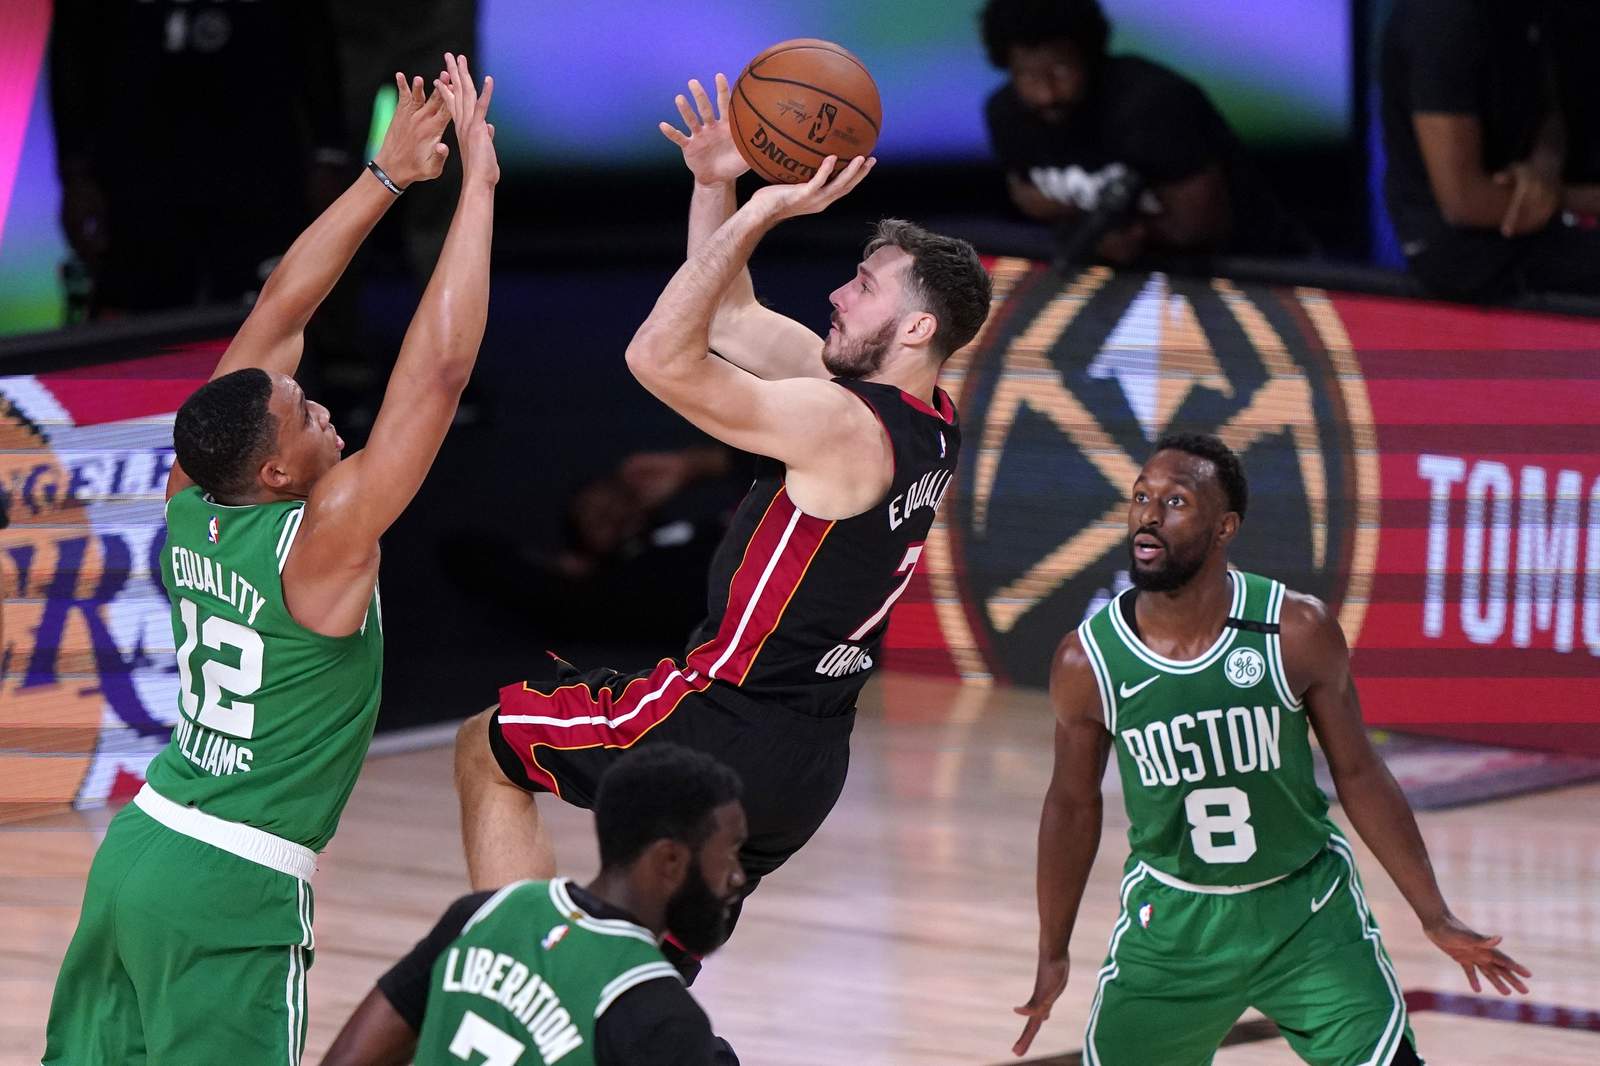 Heat try to extend lead over Celtics in Game 4